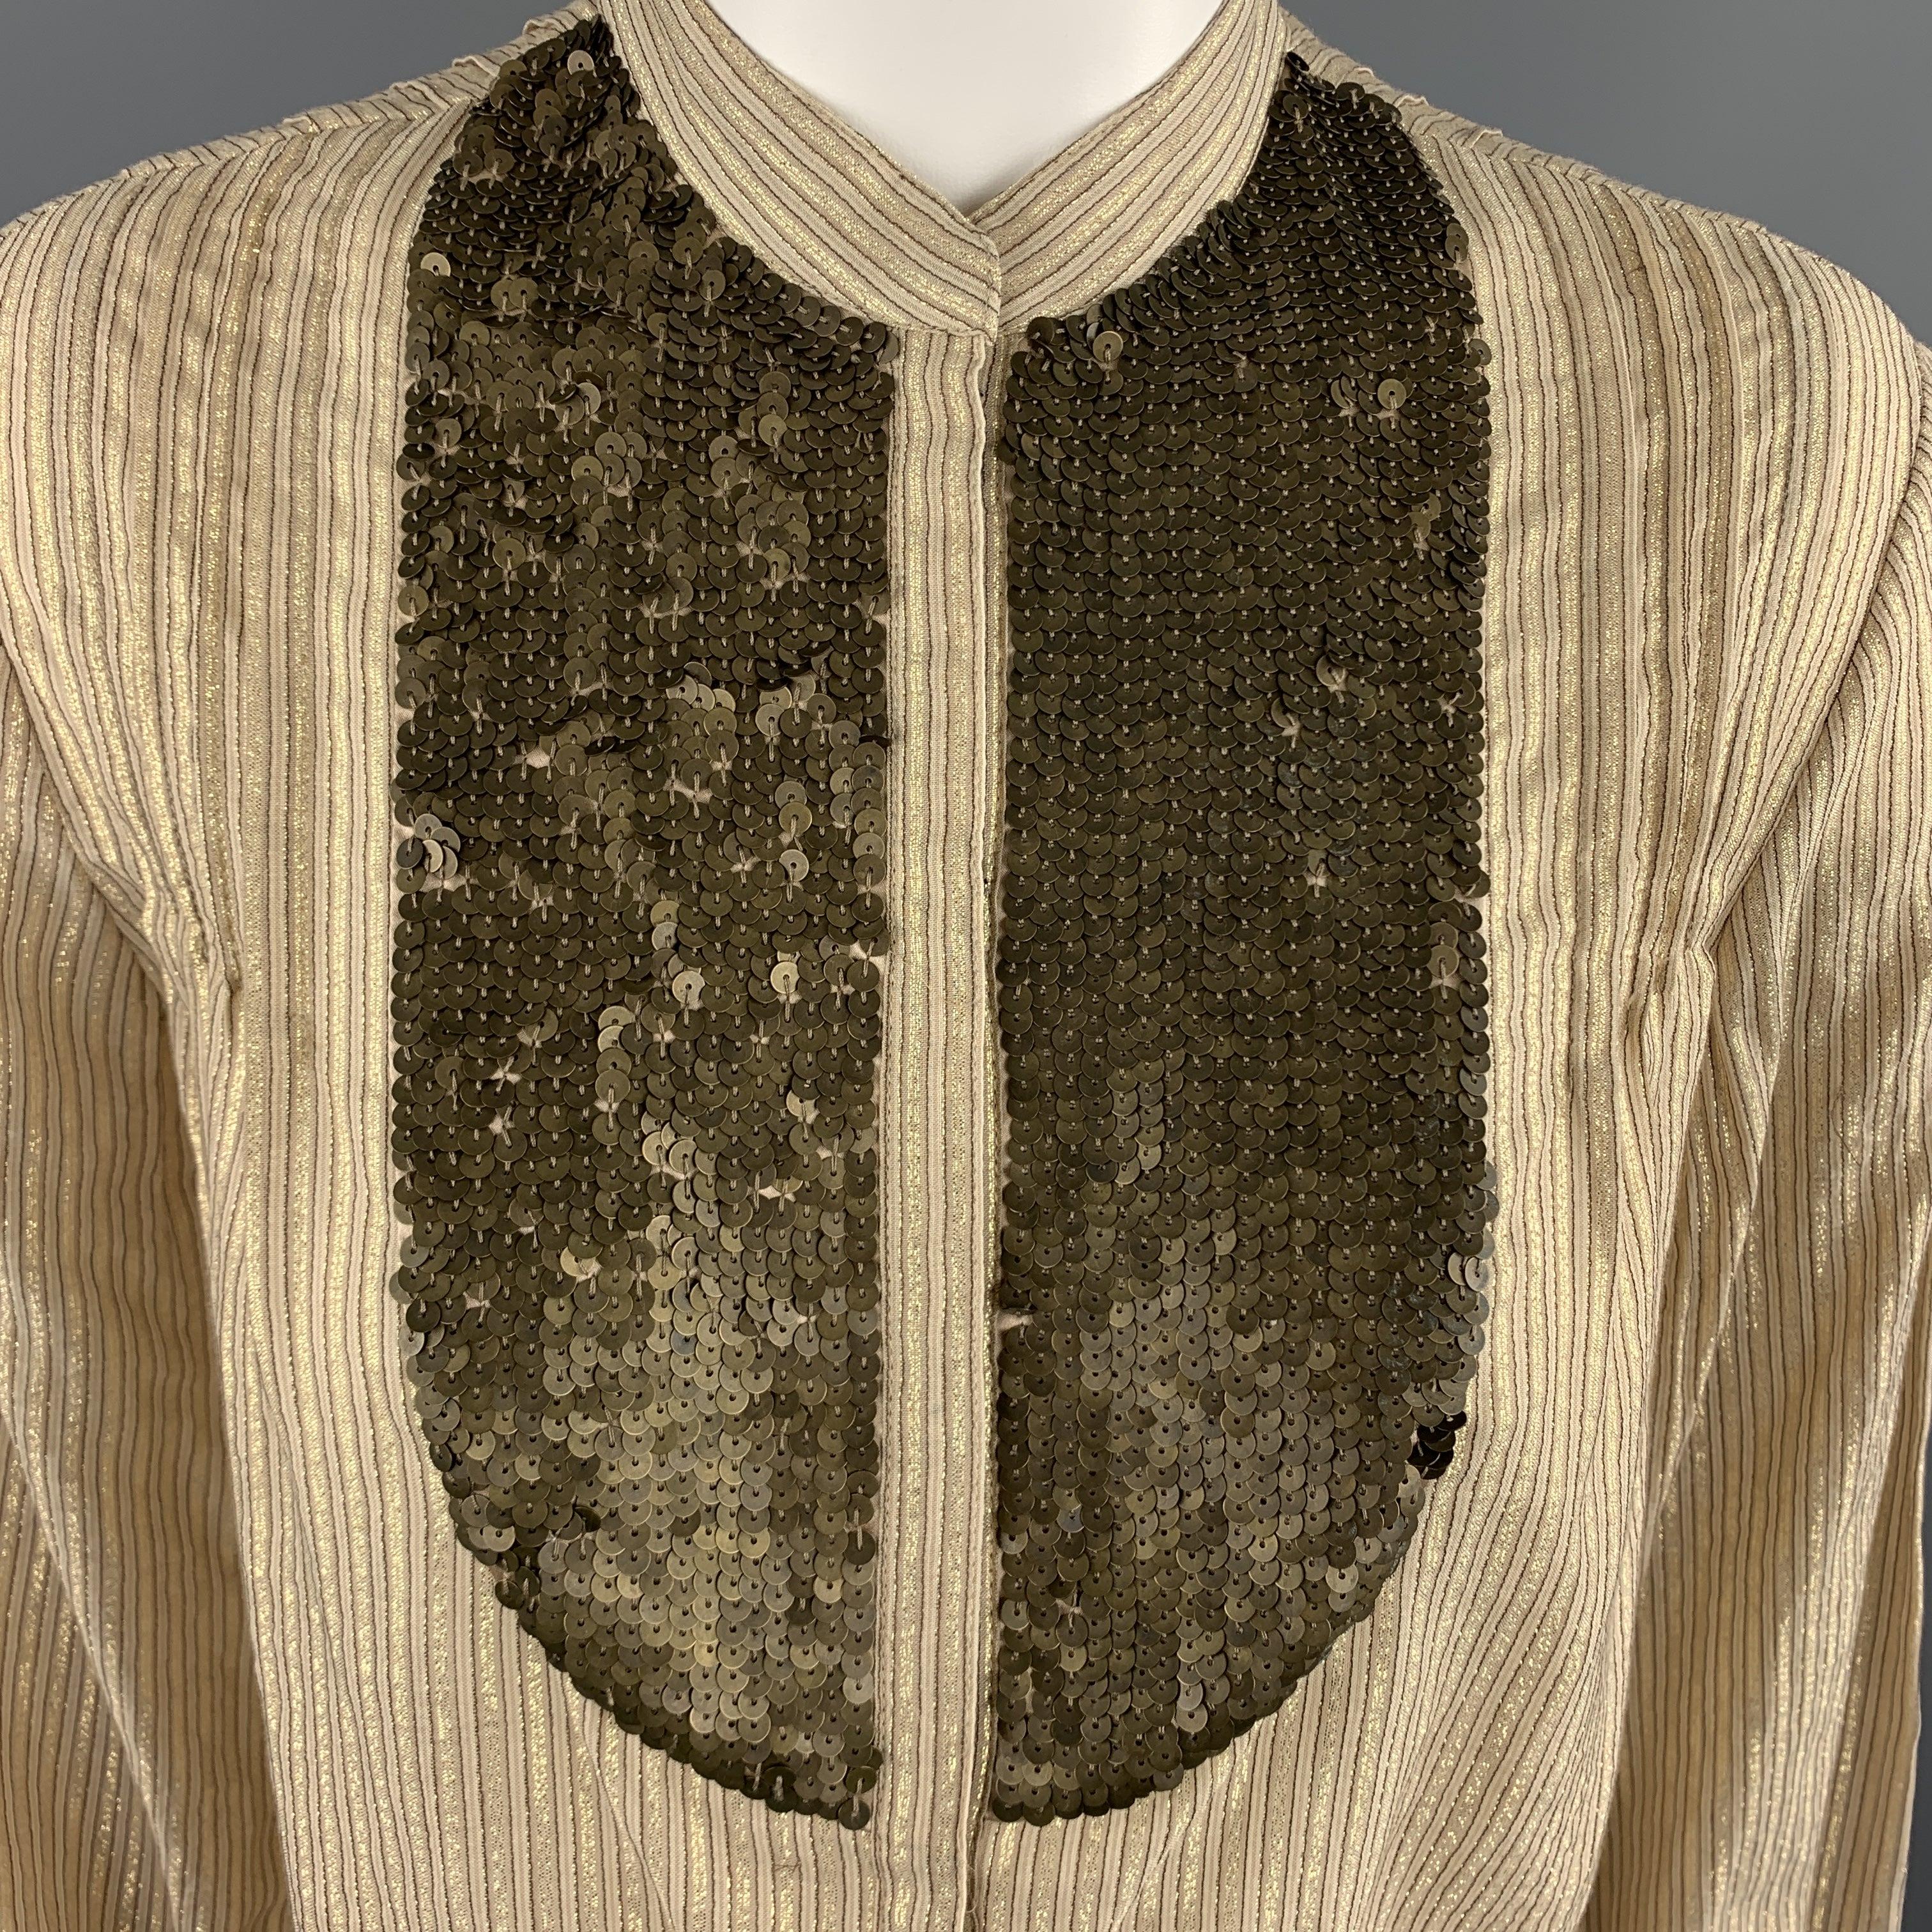 3.1 PHILLIP LIM blouse comes in gold metallic Lurex striped cotton with a band Nehru collar hidden placket snap closure front, and sequin bib panel.
Excellent
Pre-Owned Condition. 

Marked:   US 4 

Measurements: 
 
Shoulder: 14 inches Chest:
38